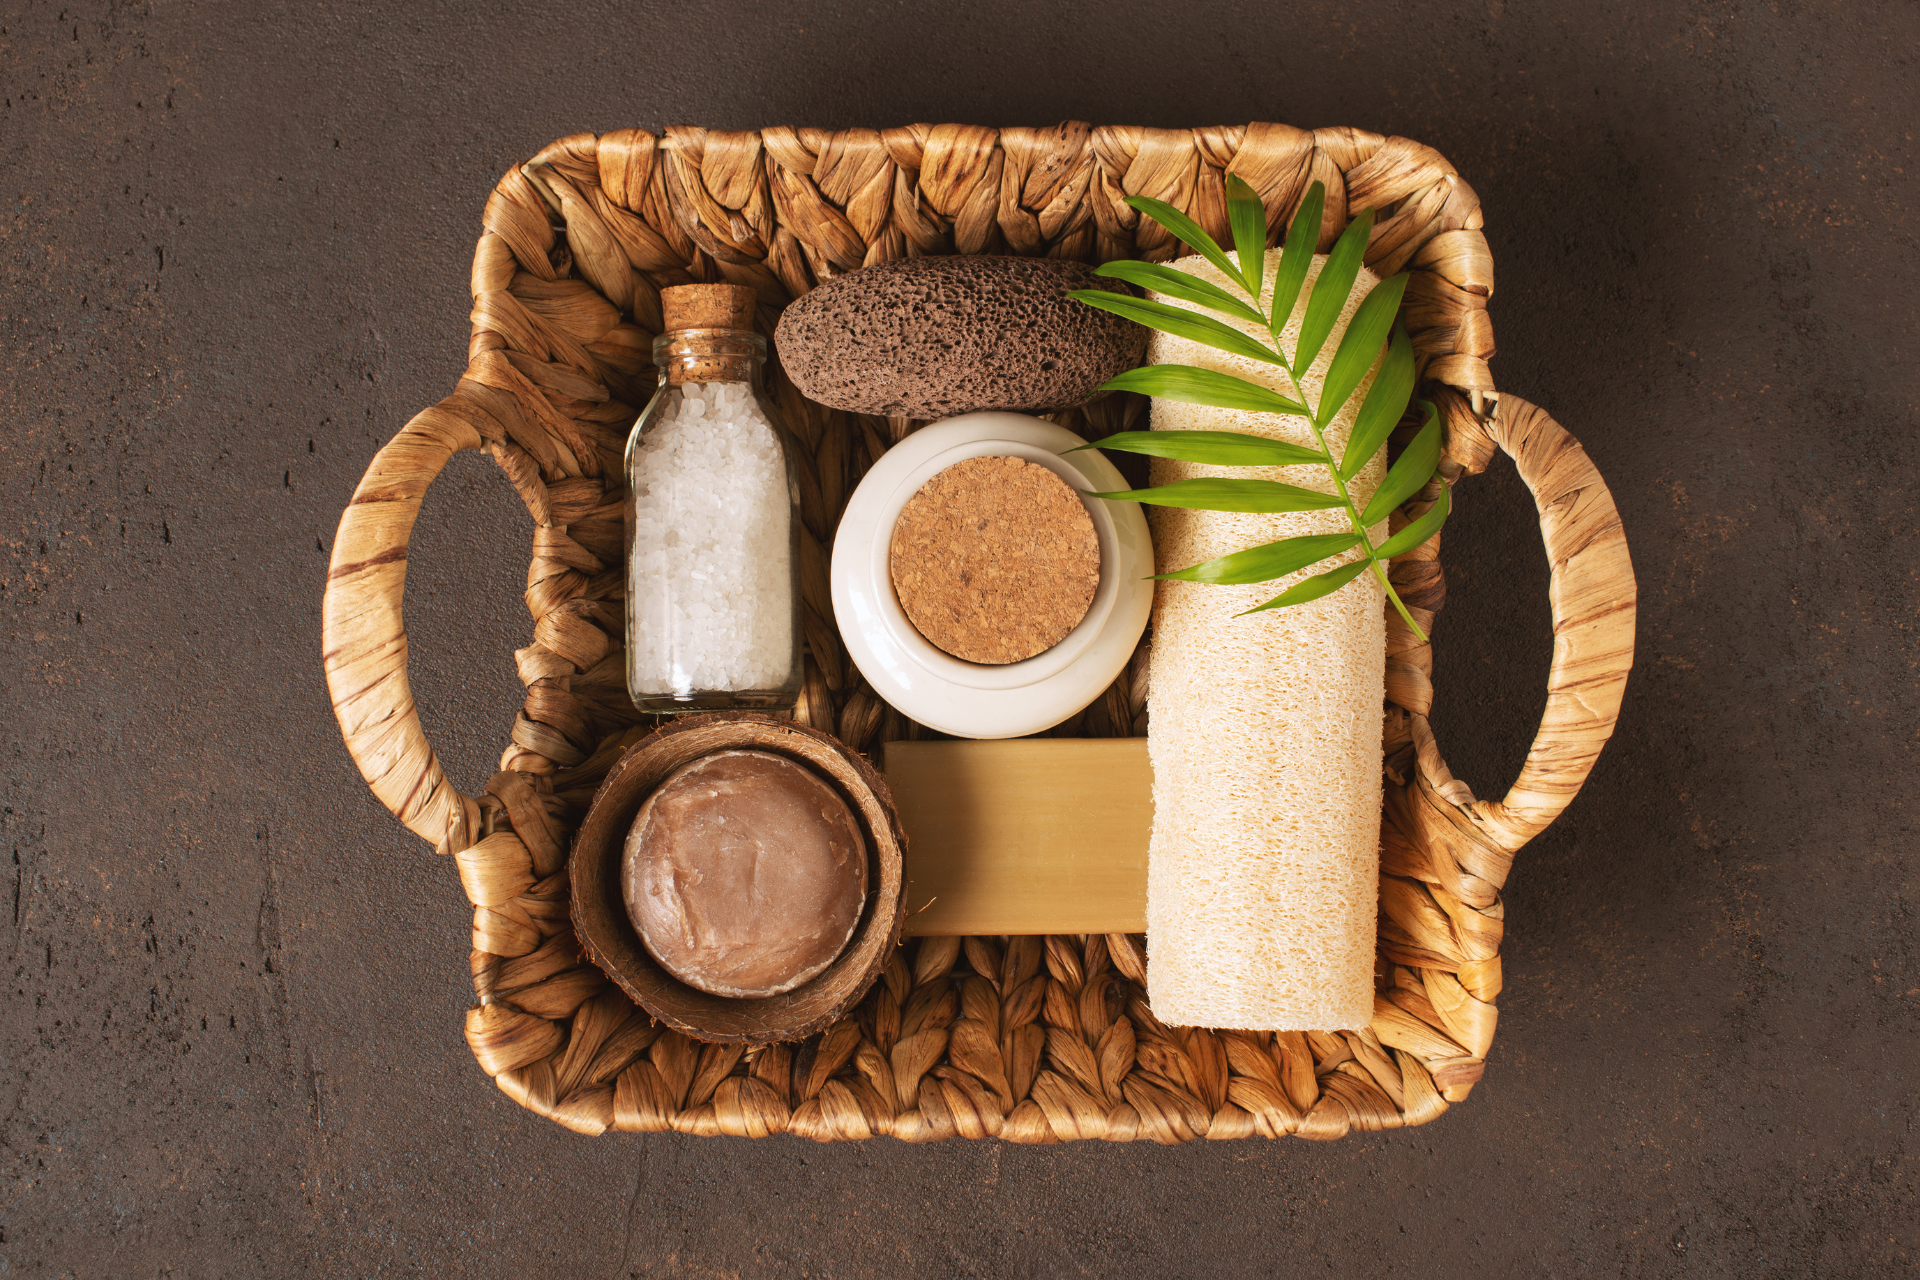 Natural bath and body products